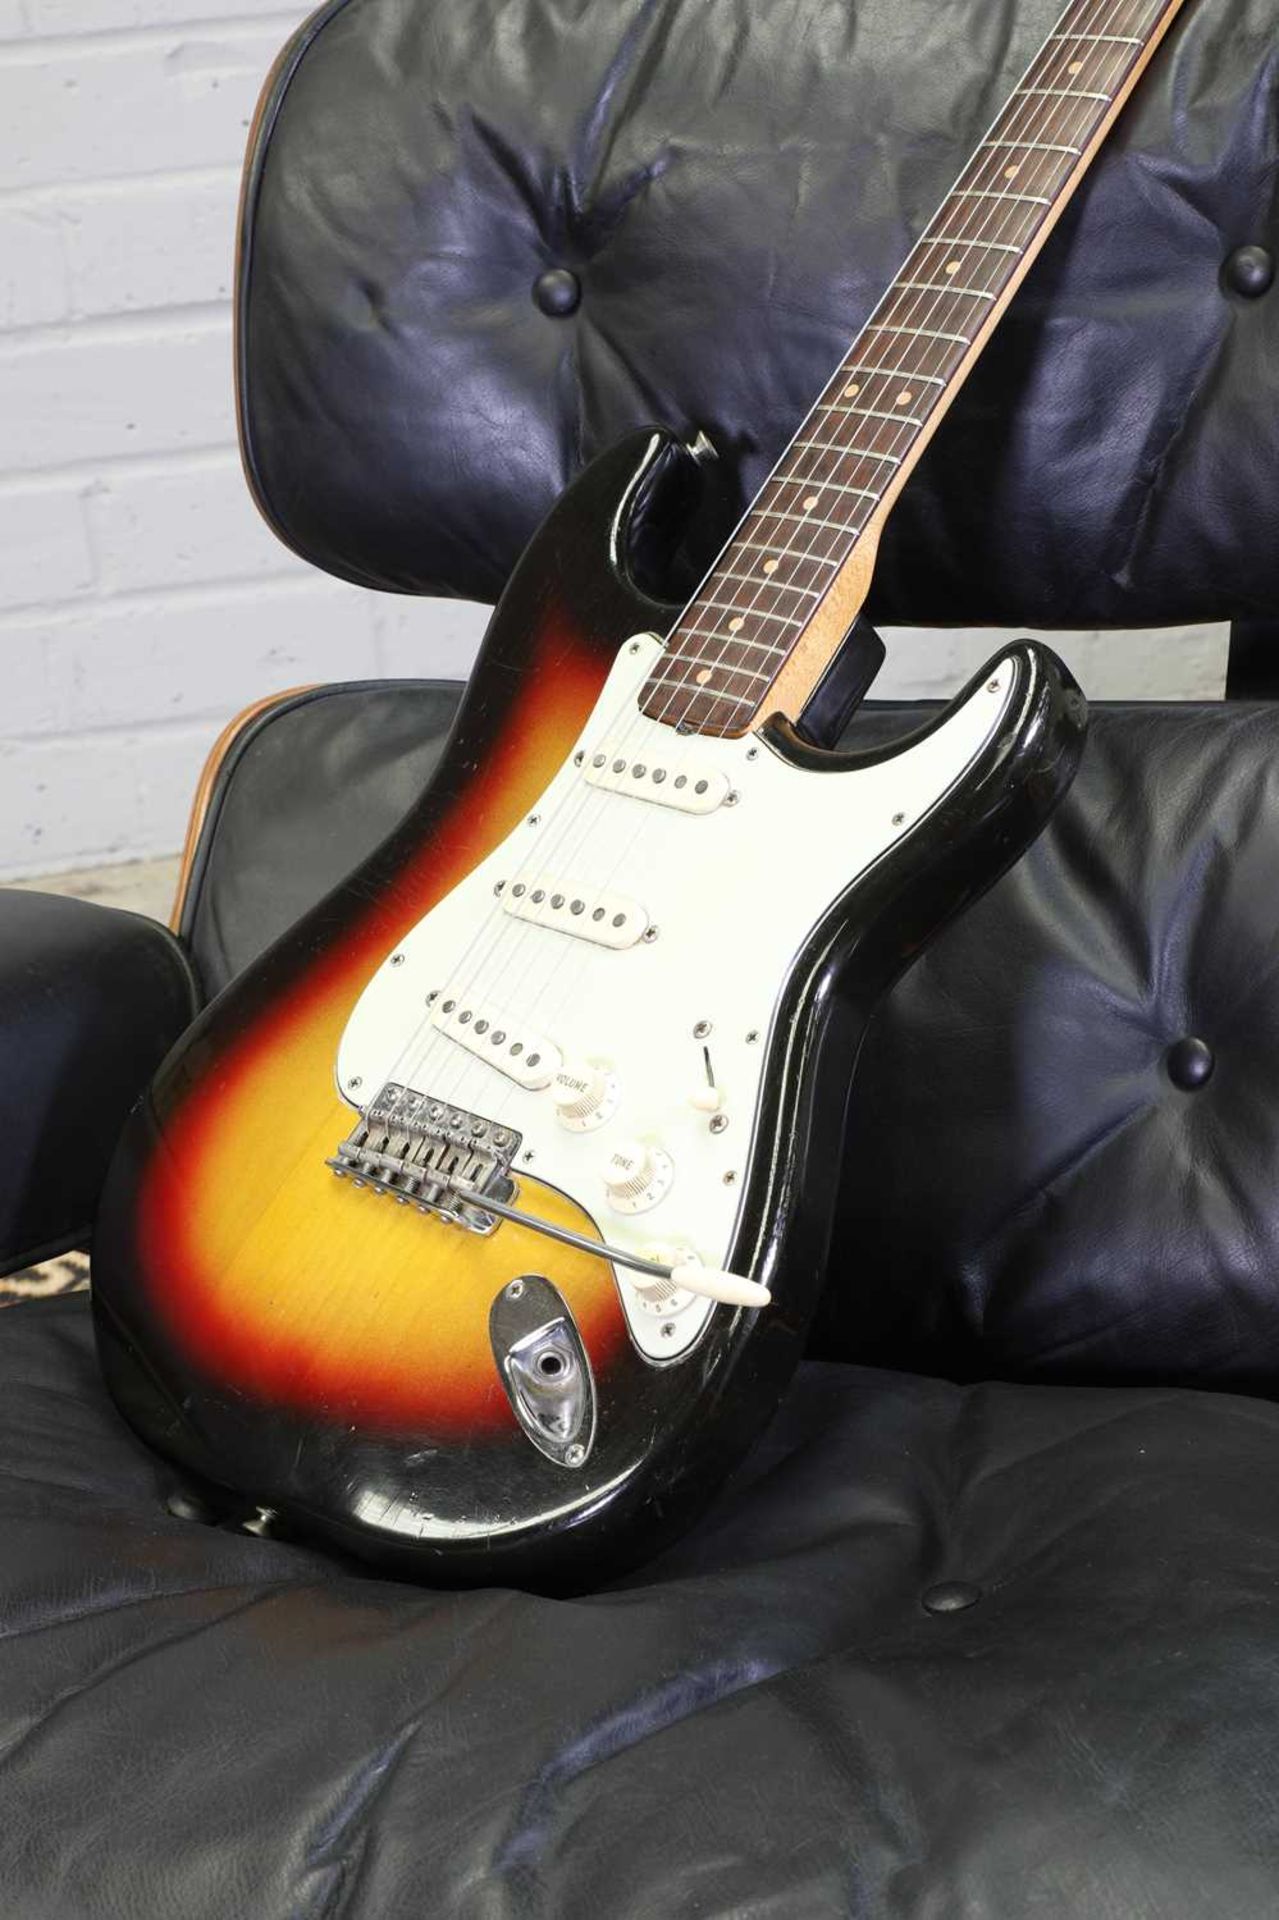 A 1963 Fender Stratocaster electric guitar, - Image 4 of 32